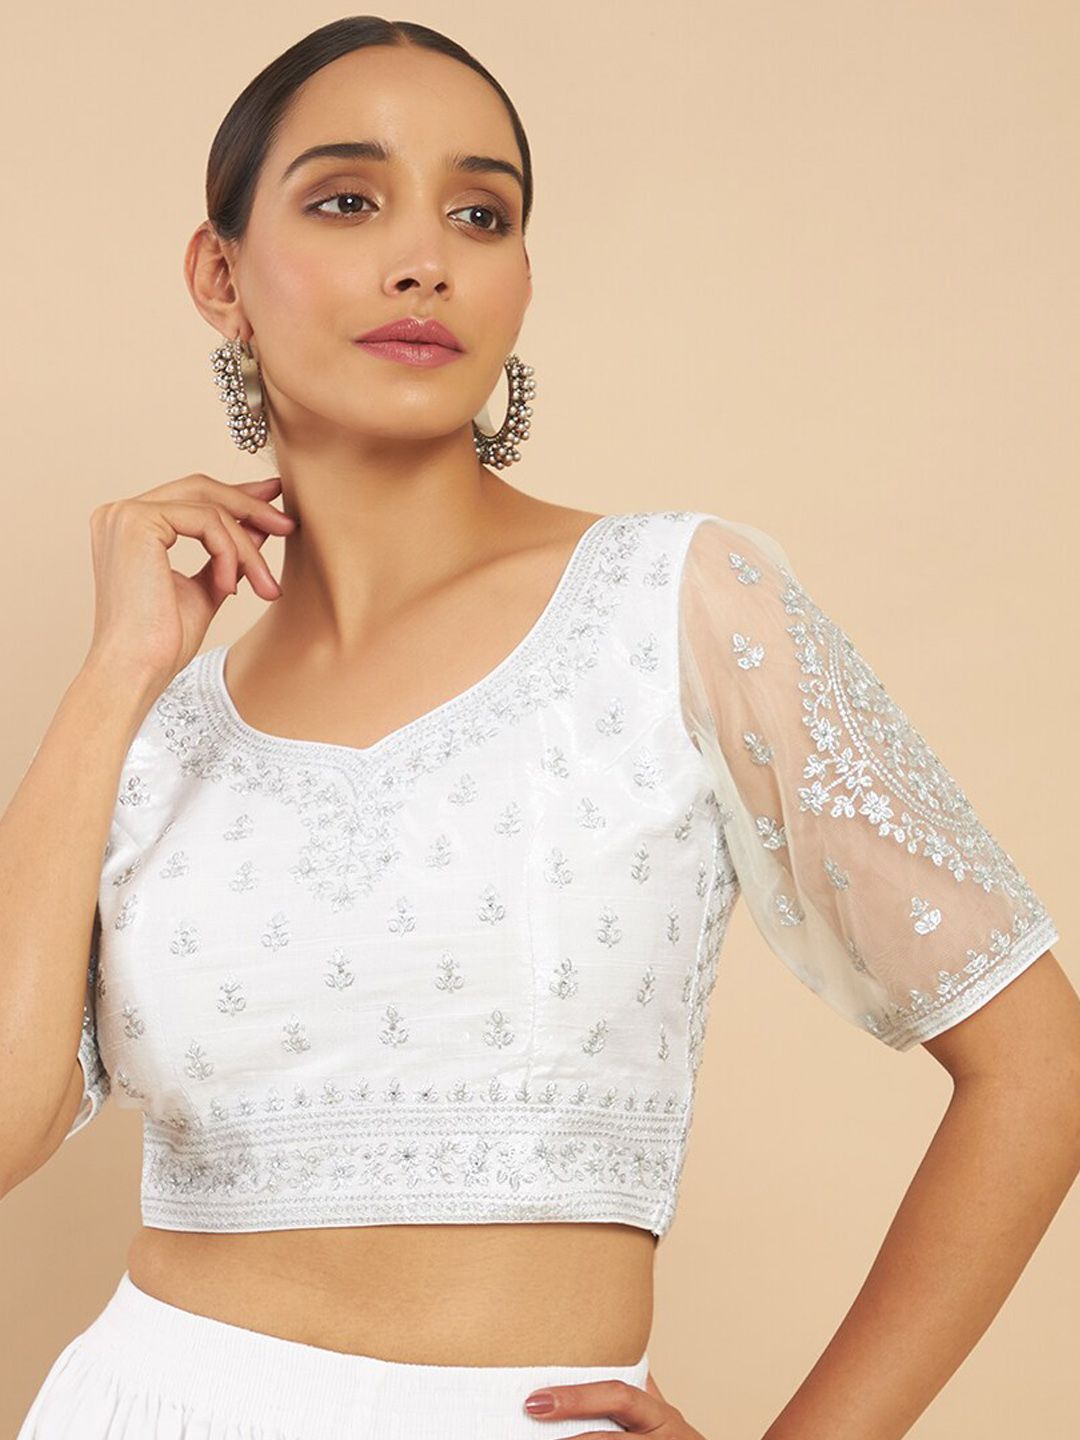 Soch Women White & Silver Embroidered Ready-Made Saree Blouse Price in India